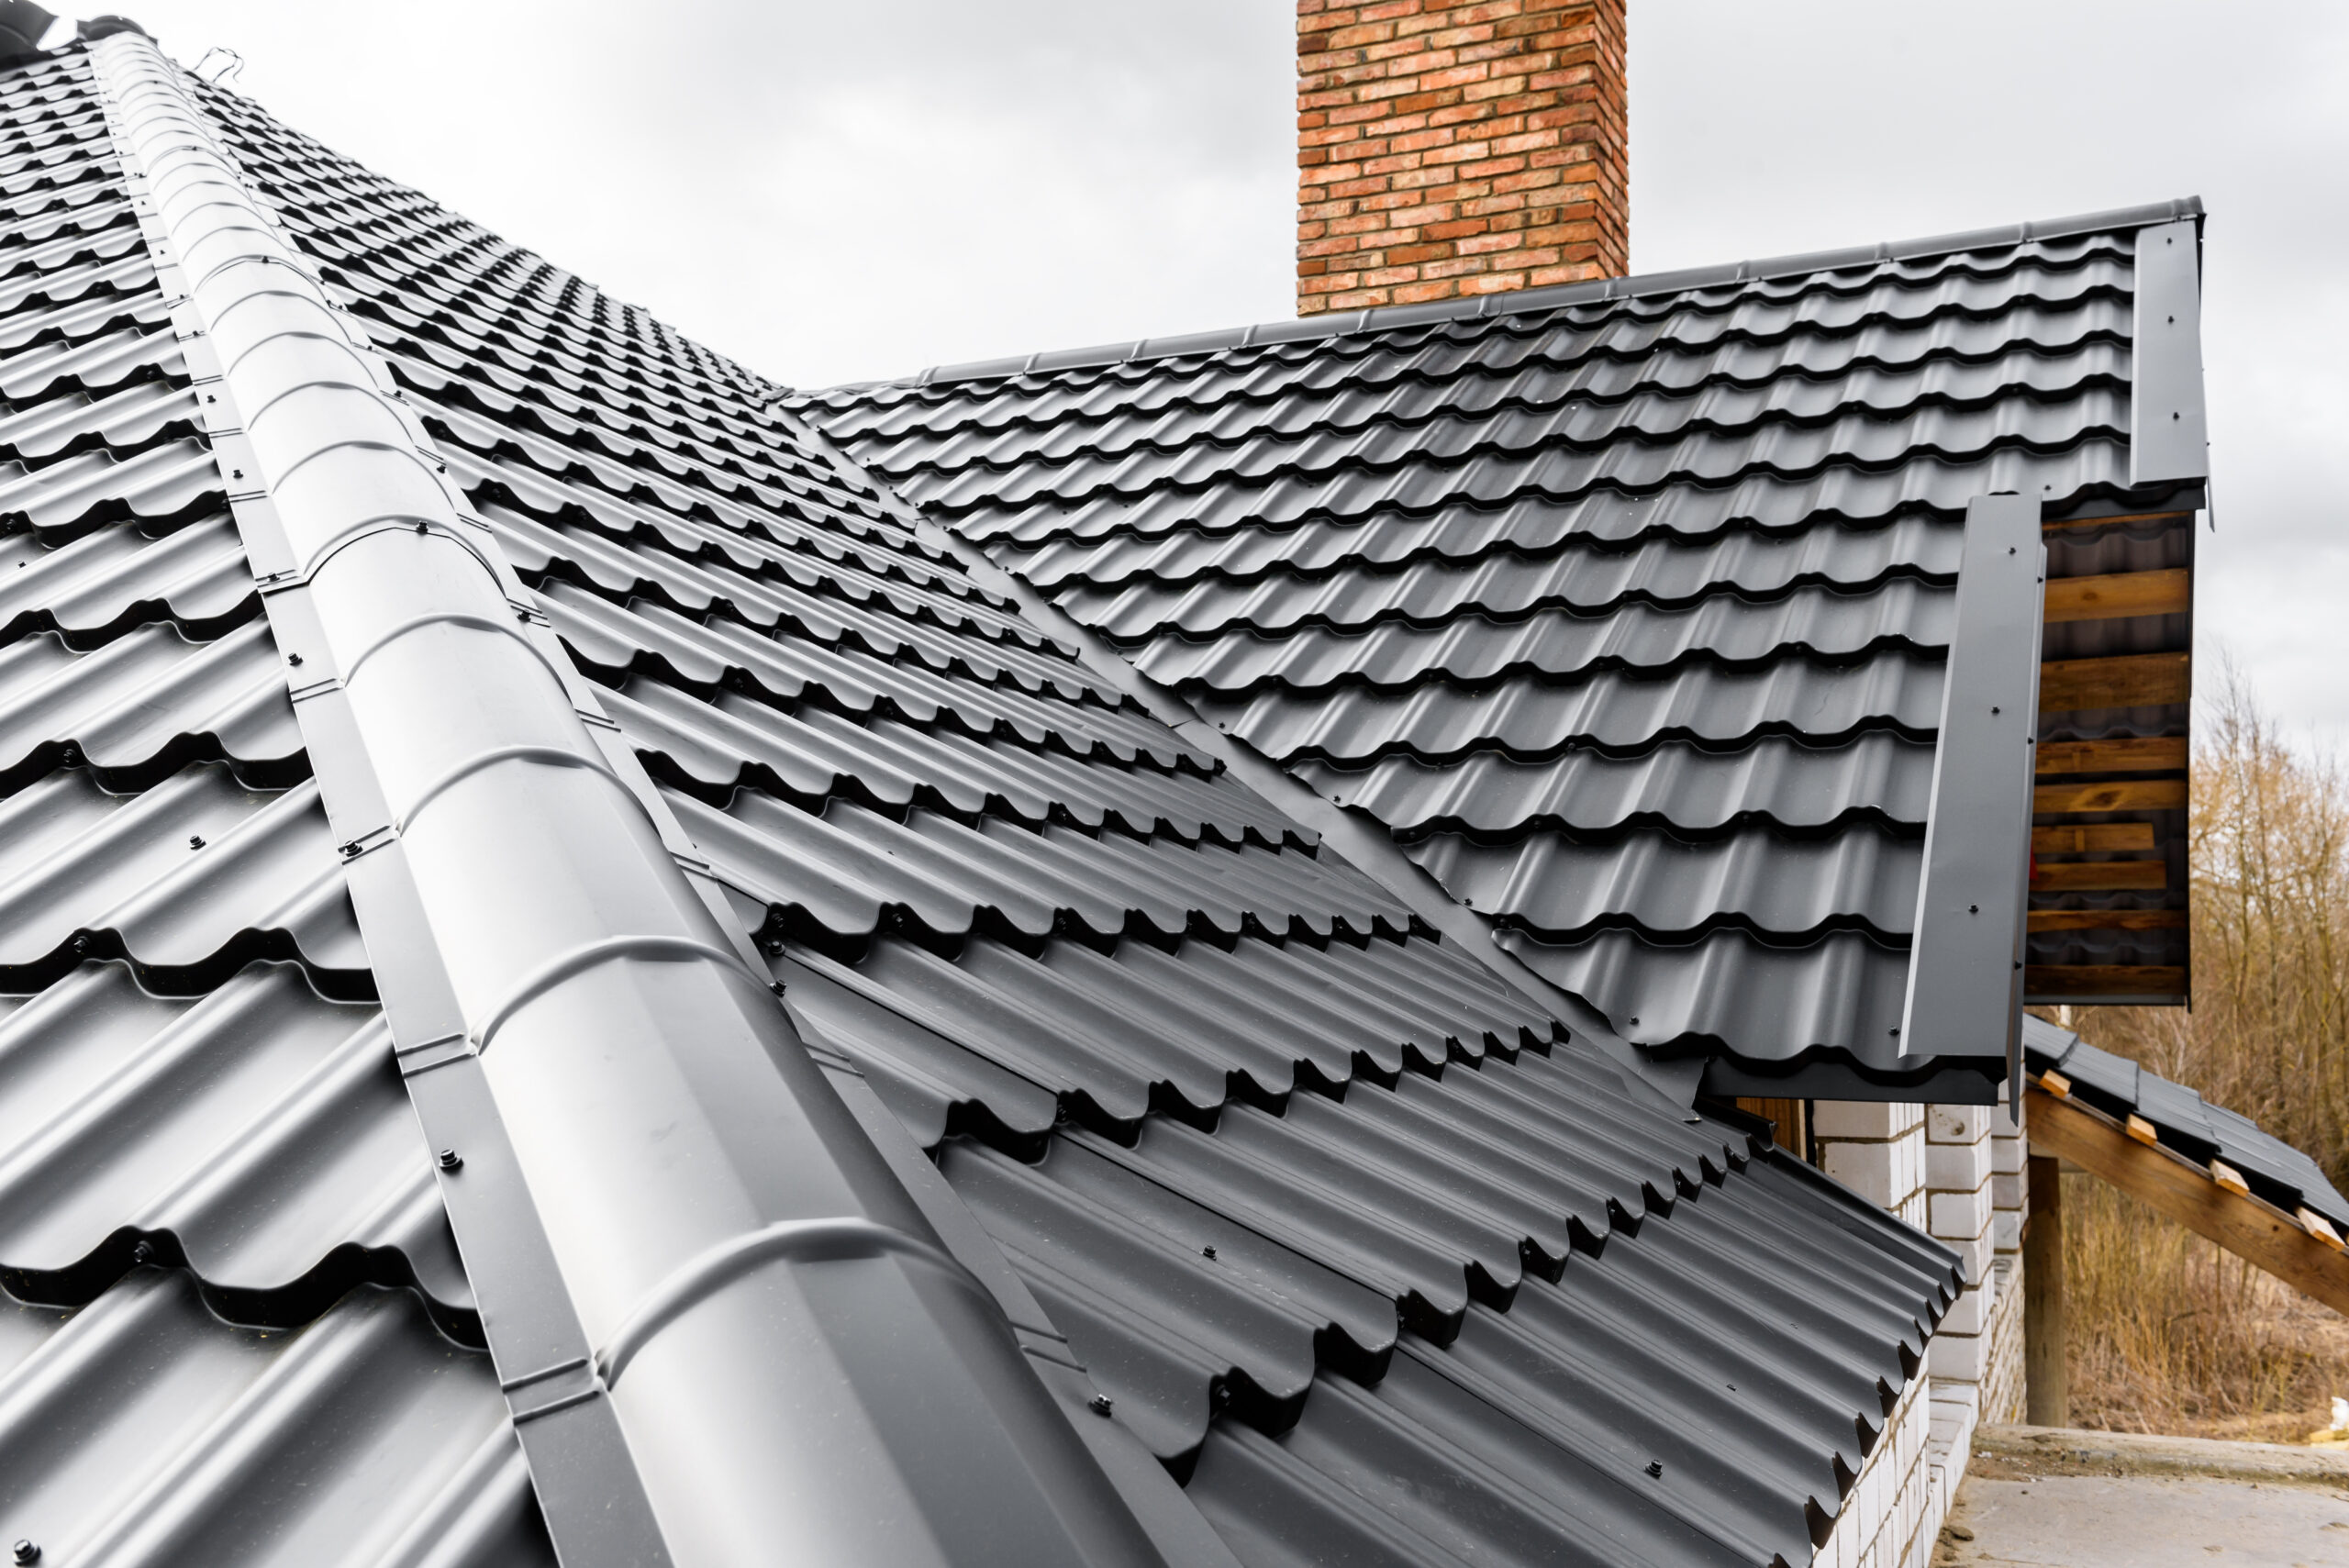 Metal Roofs vs. Wooden Shake Shingles: Which One is Better in the Long Term?